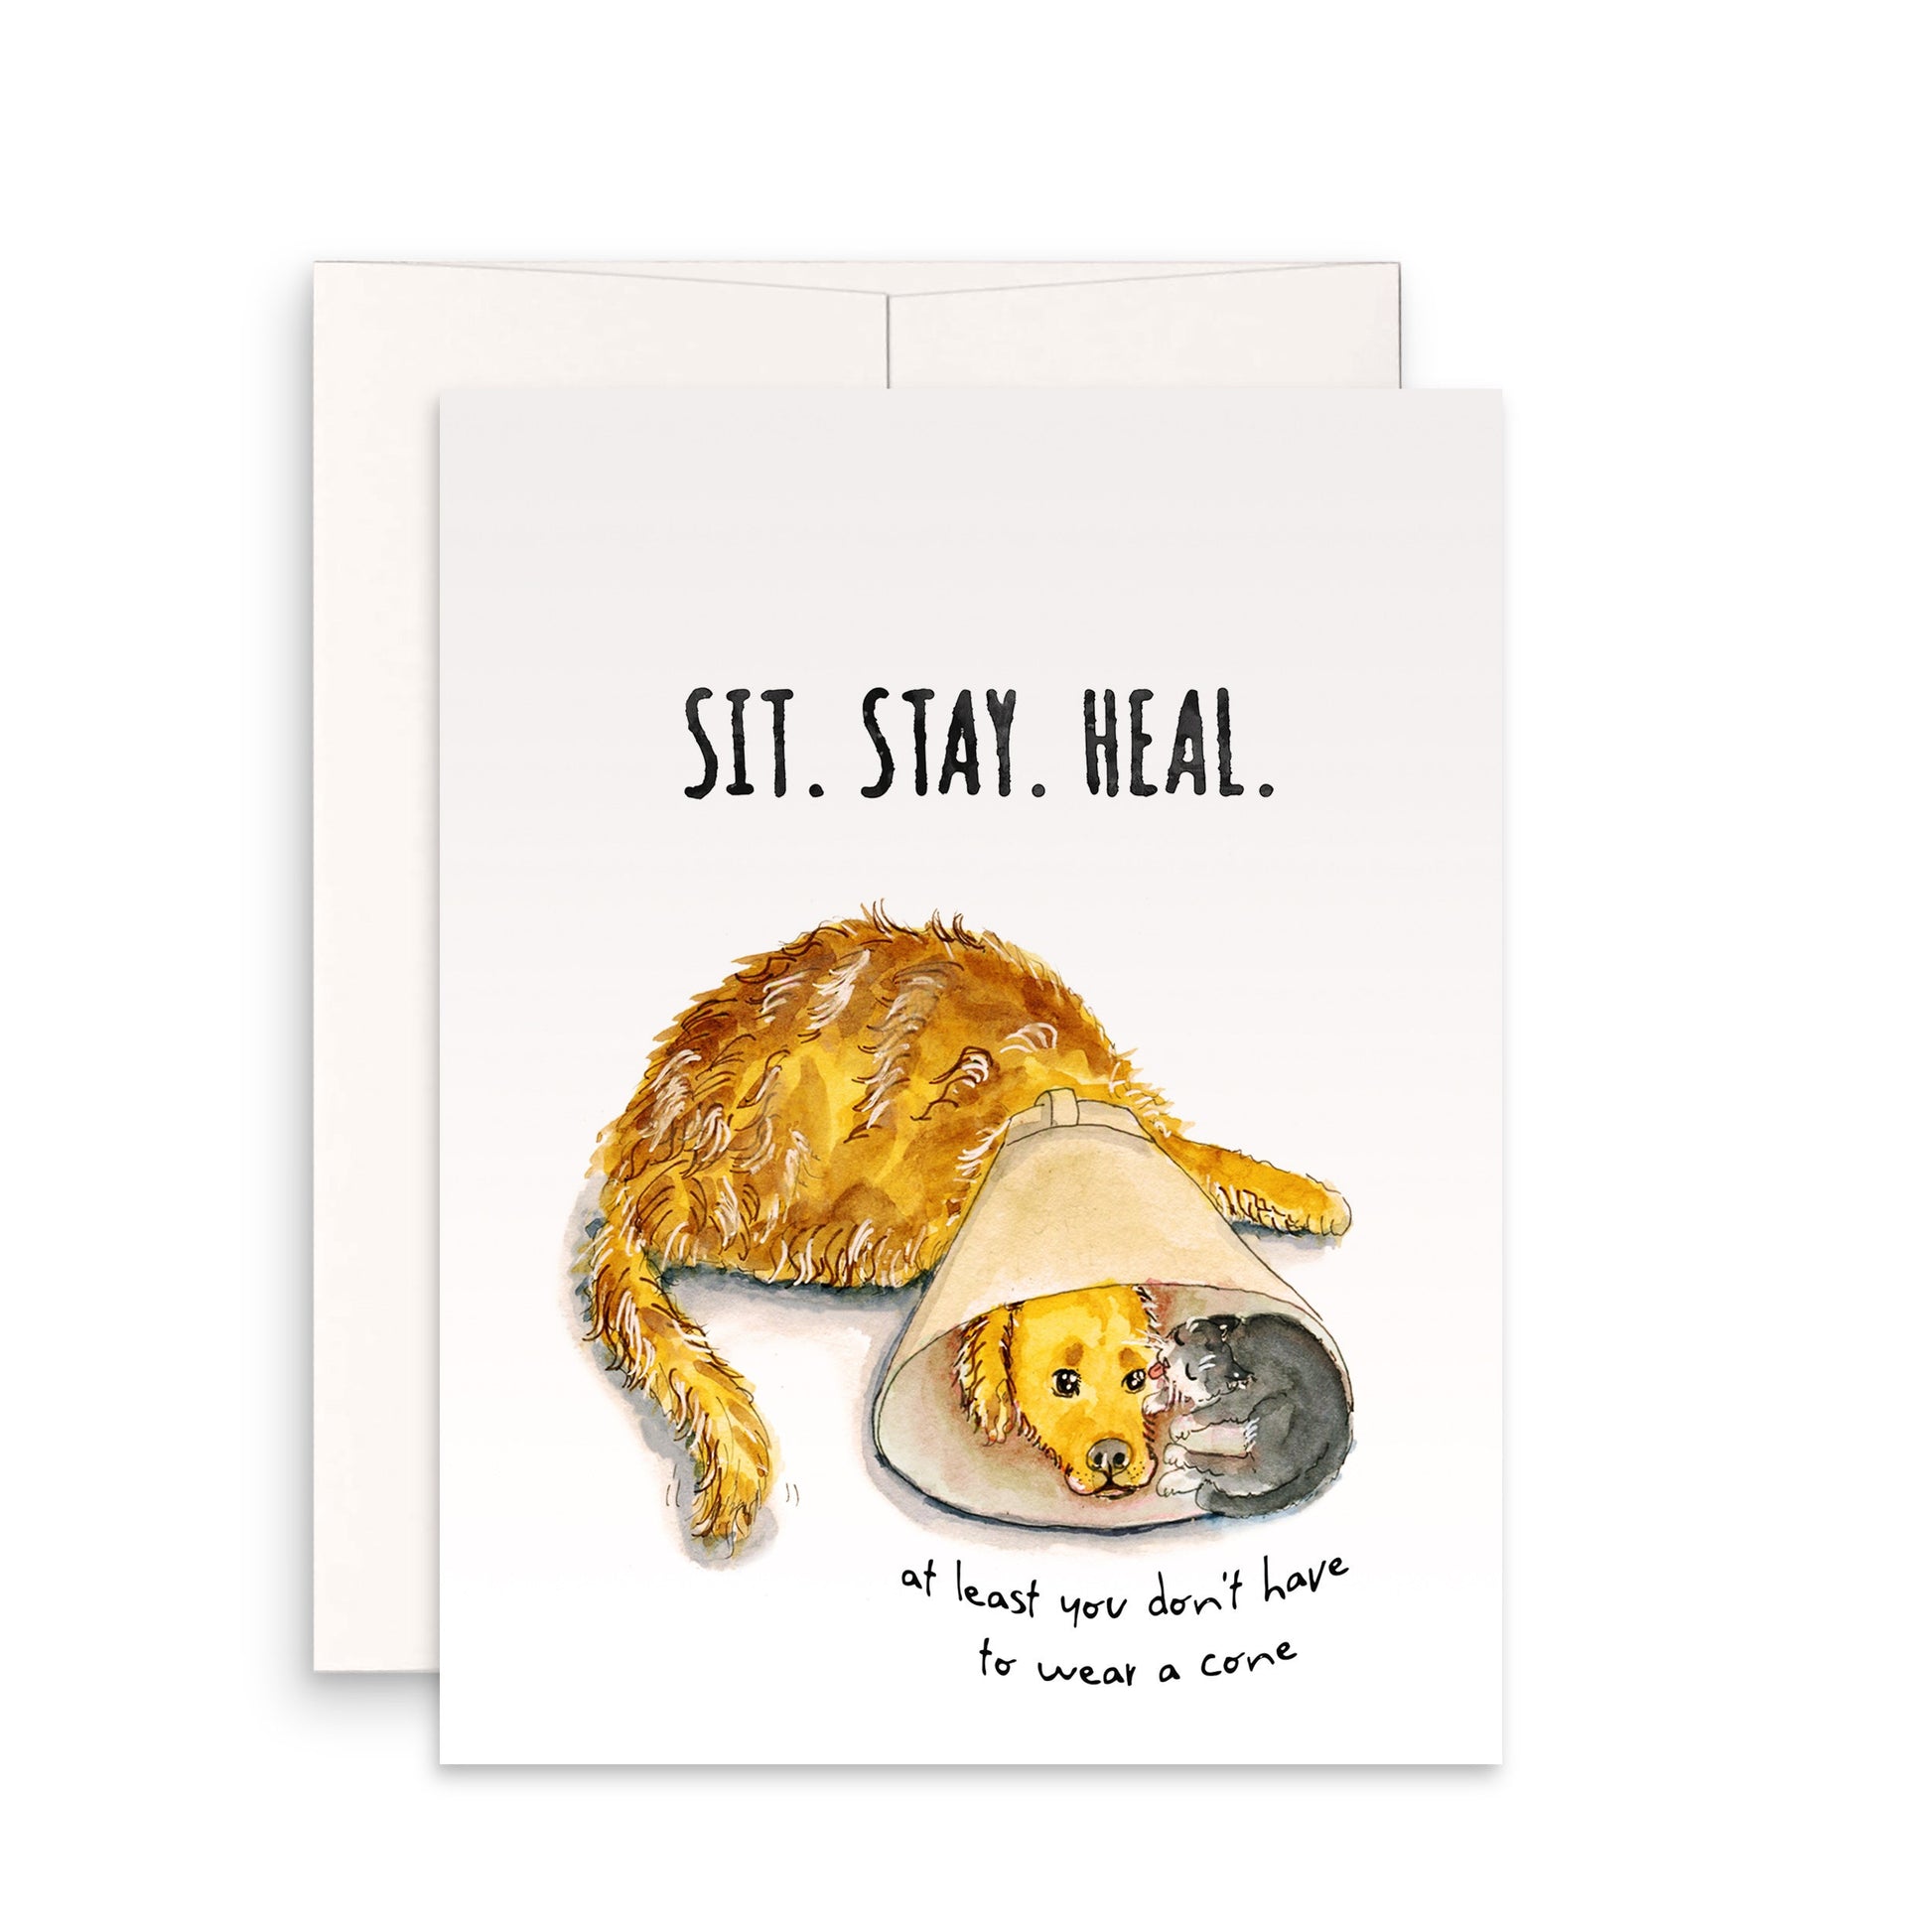 Dog Sympathy Card - Get Well Soon Card For Friends - Golden Retriever Dog And Cat Cone of Shame